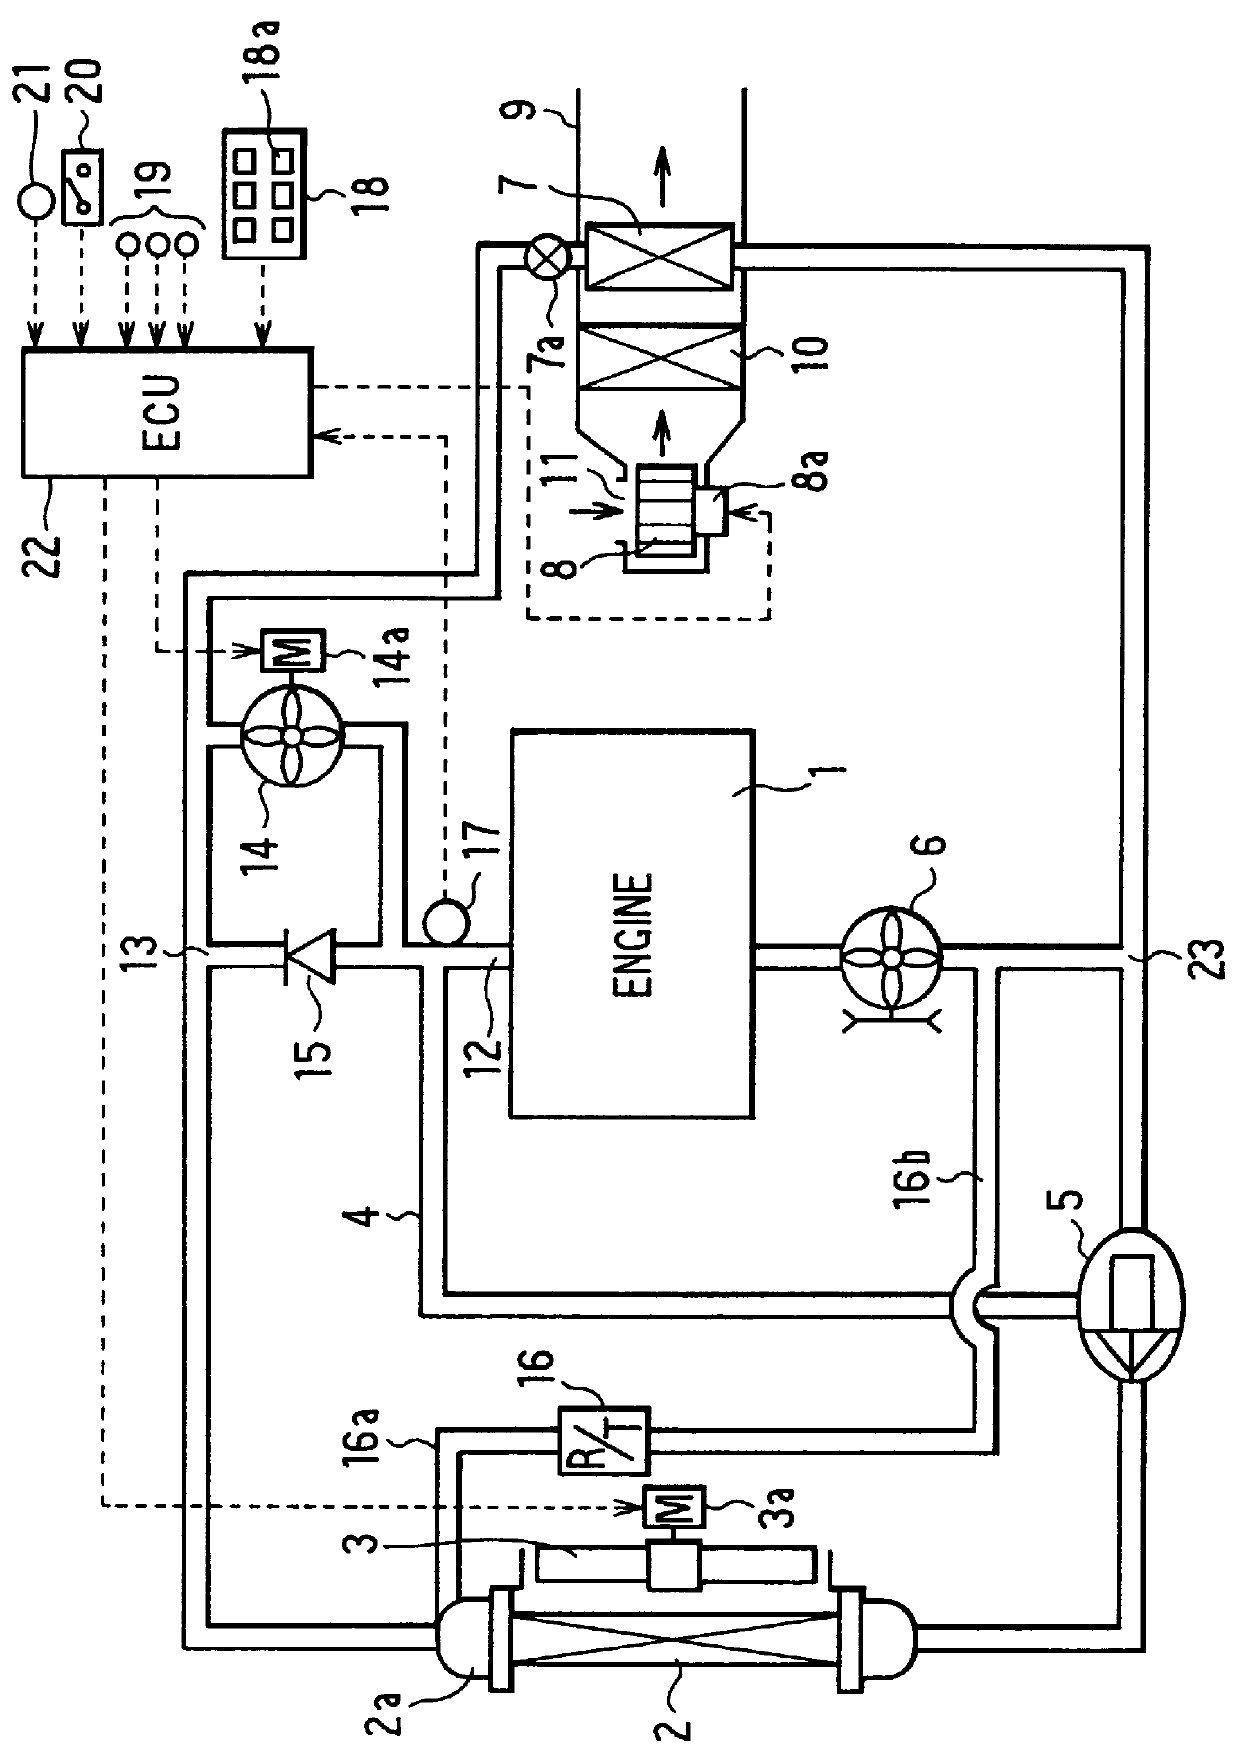 Cooling water circuit system